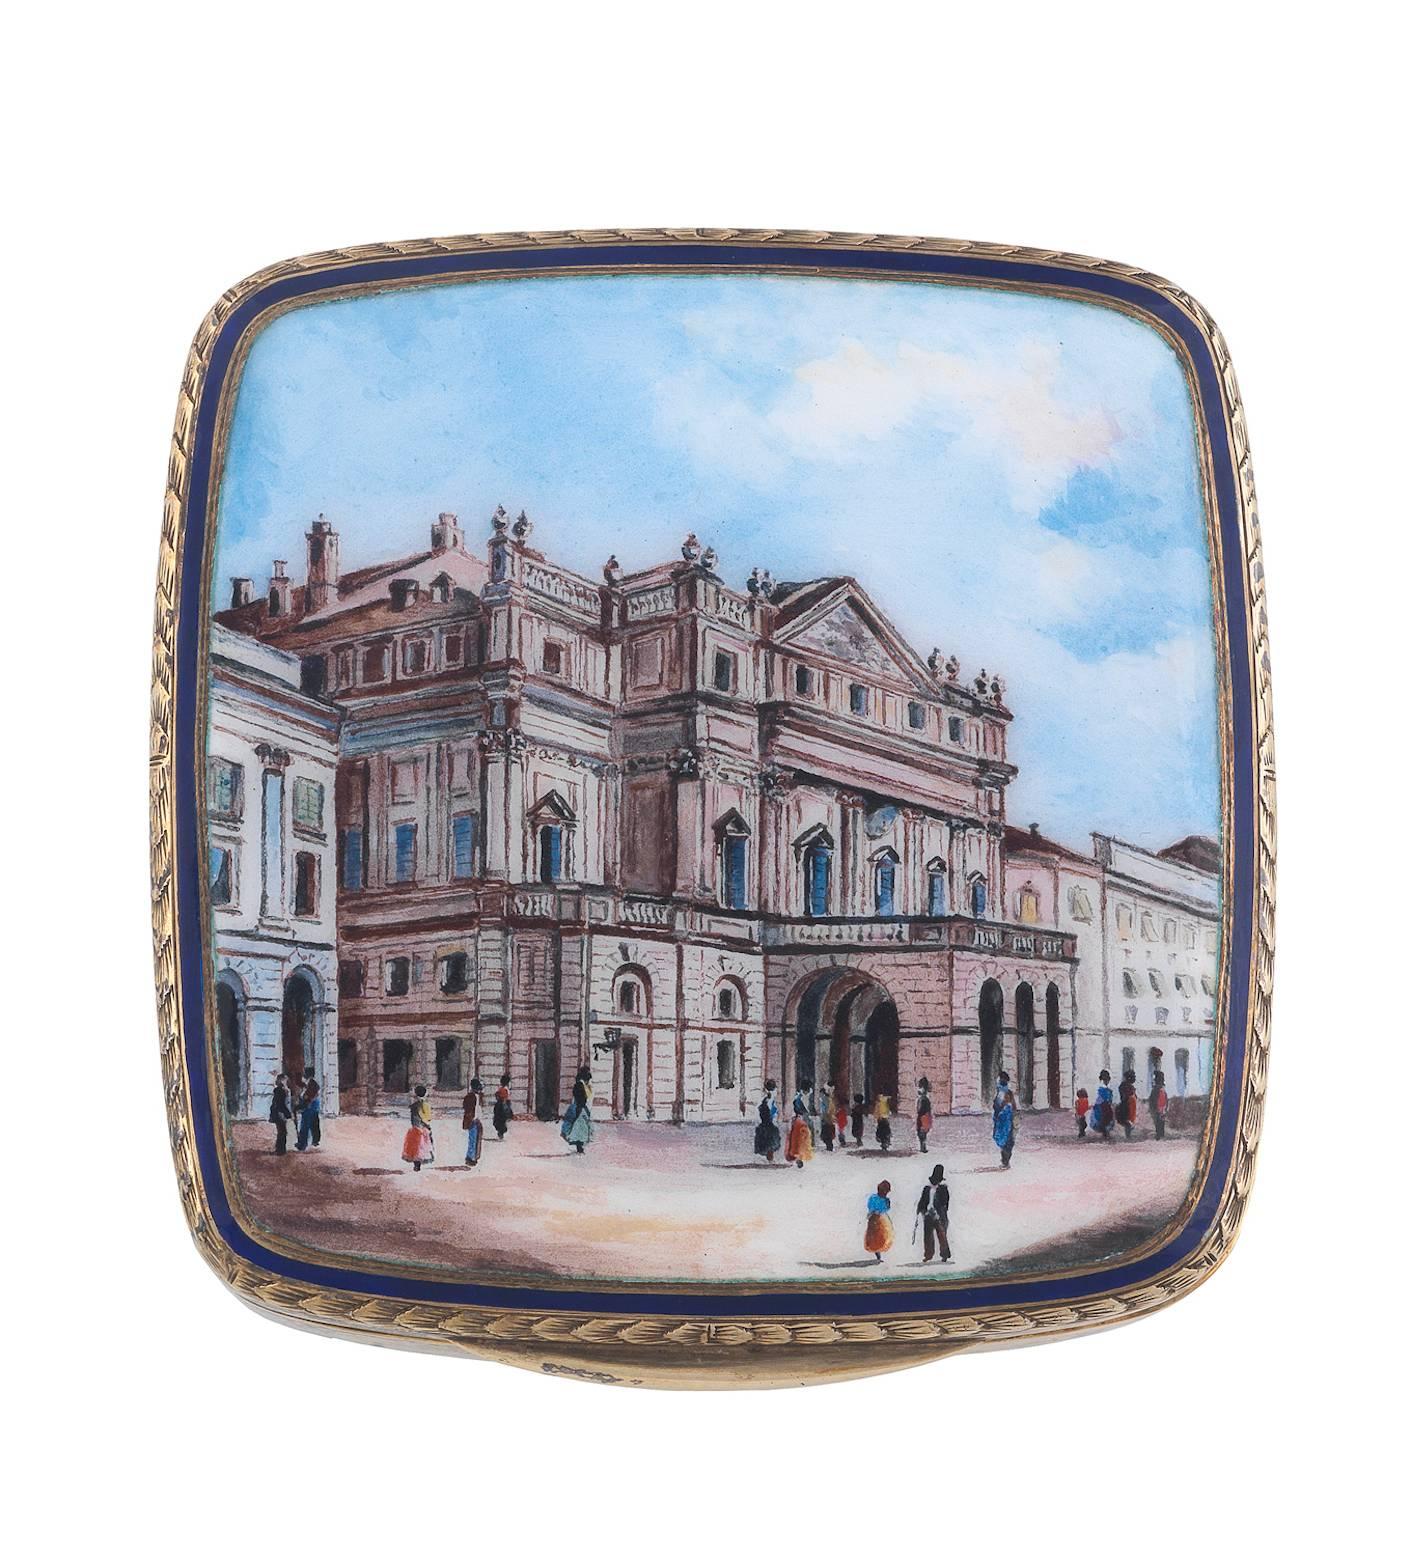 Of rounded corners square shape, the lid painted to depict the theater “La Scala” in Milano

Dimension: 7.5 x 7.5 cm

Weight: 200 gr

Italian silver marks

In the Calderoni Gioielli Via Montenapoleone fitted case

